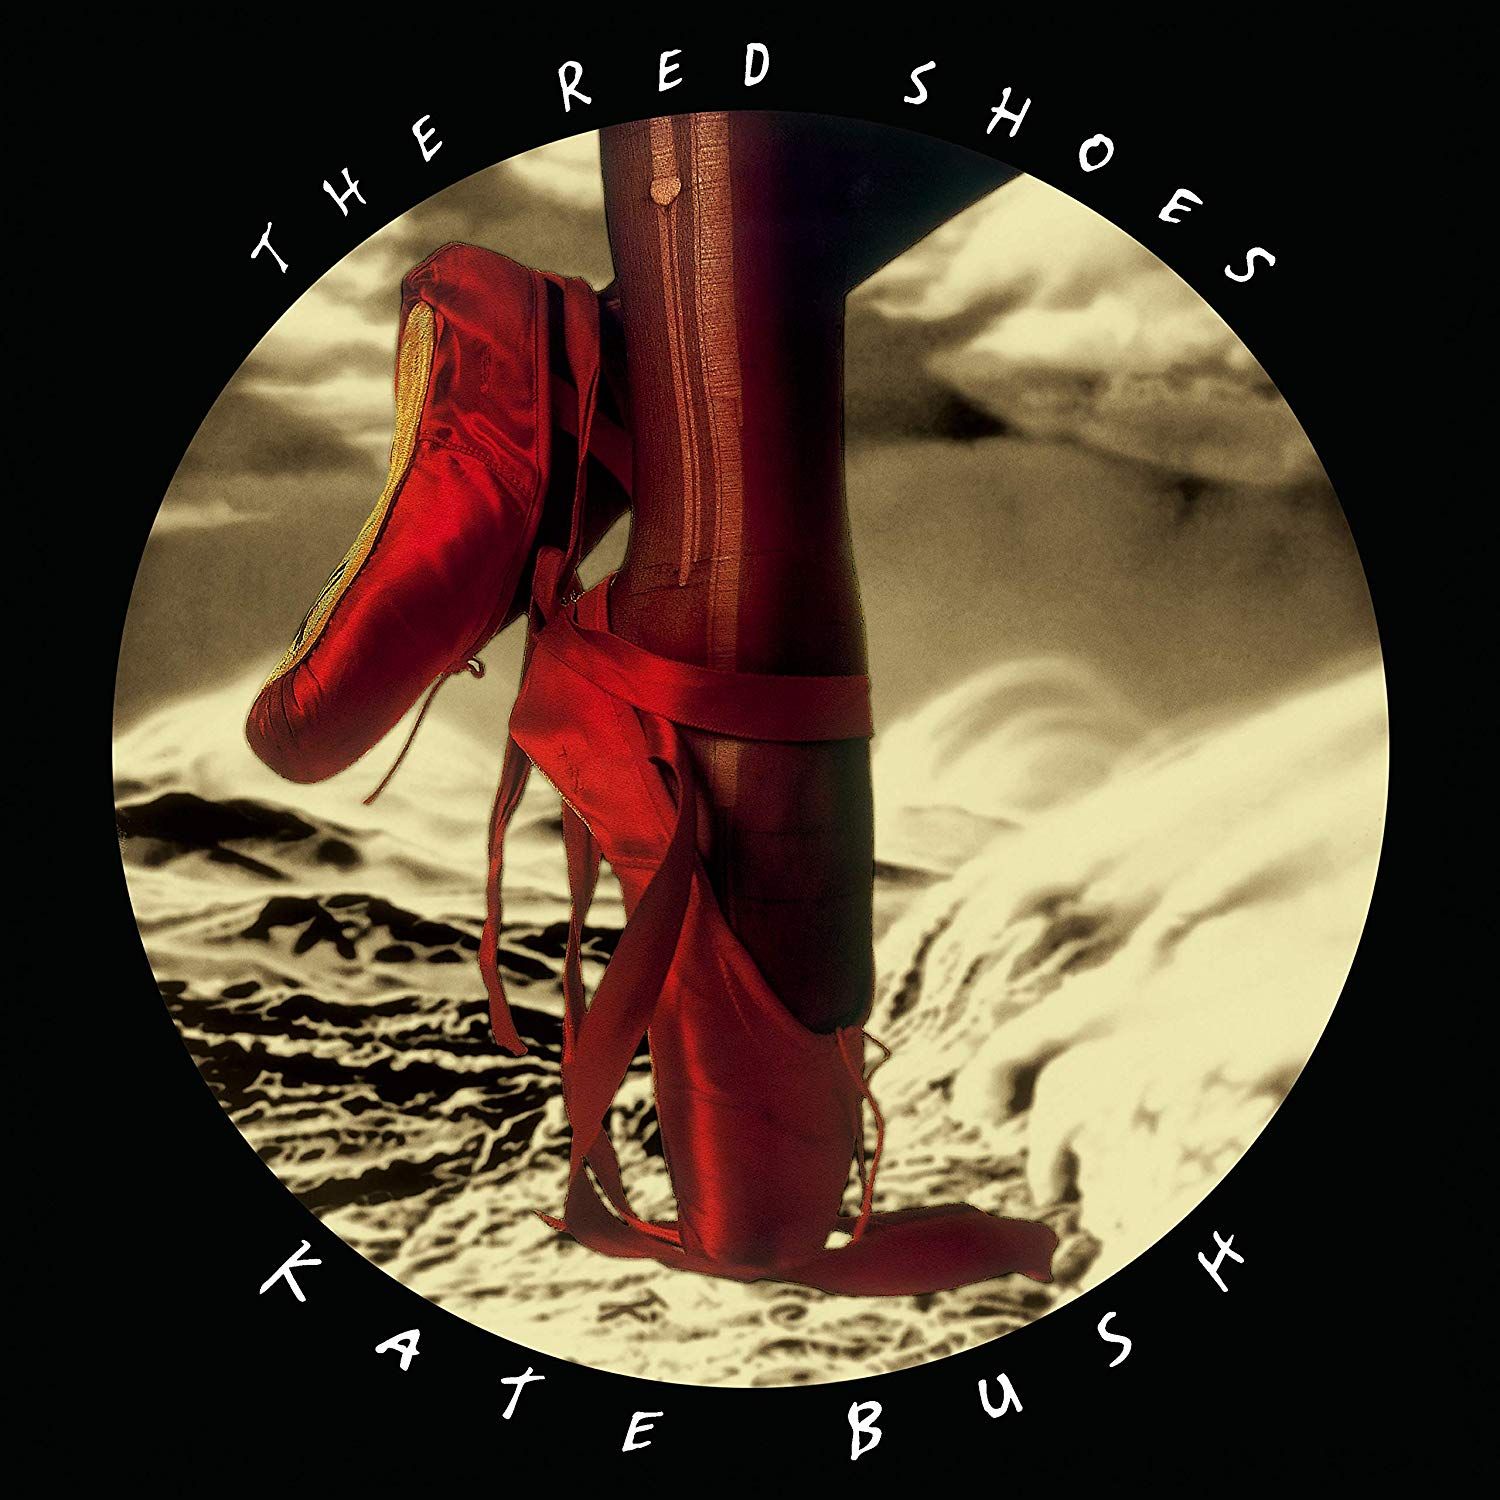 KATE BUSH / ケイト・ブッシュ / THE RED SHOES (2018 REMASTER CD)